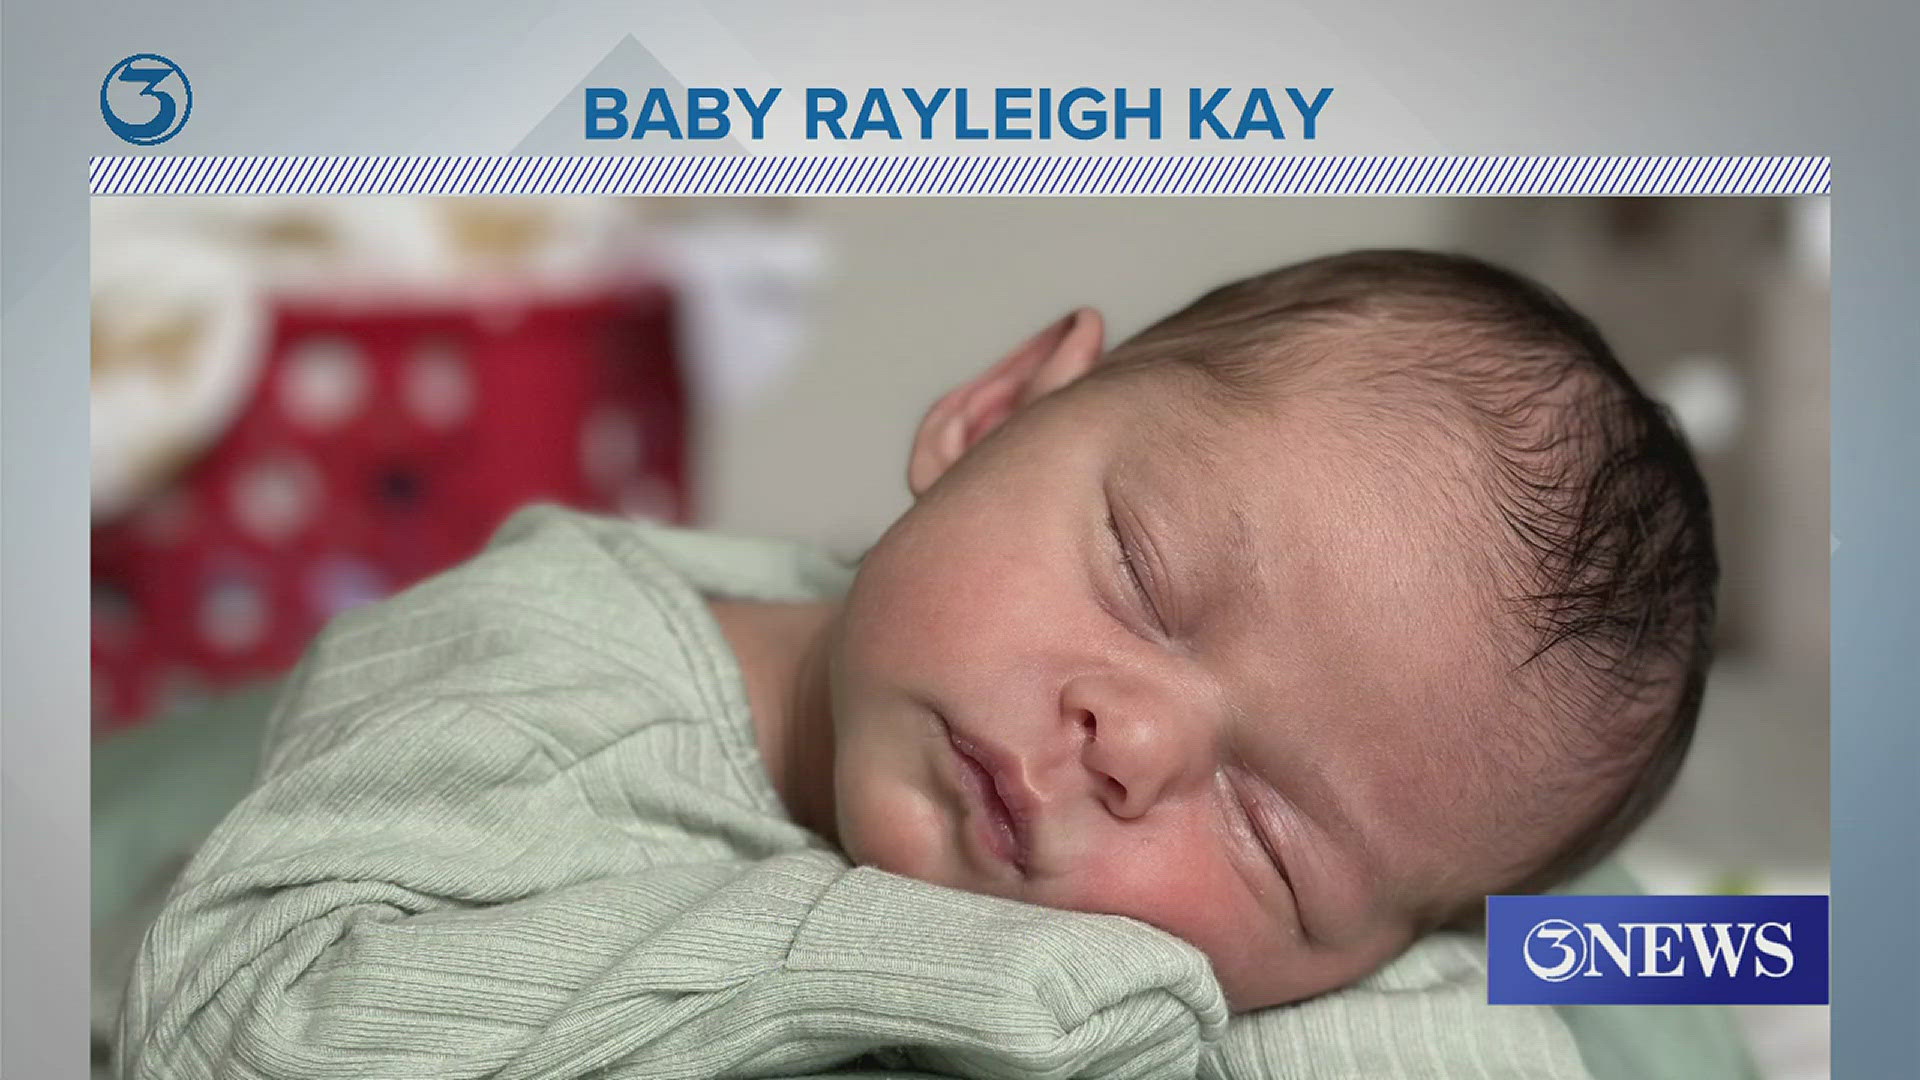 Chief Meteorologist Alan Holt gives us an update on his daughter Rayleigh Holt.